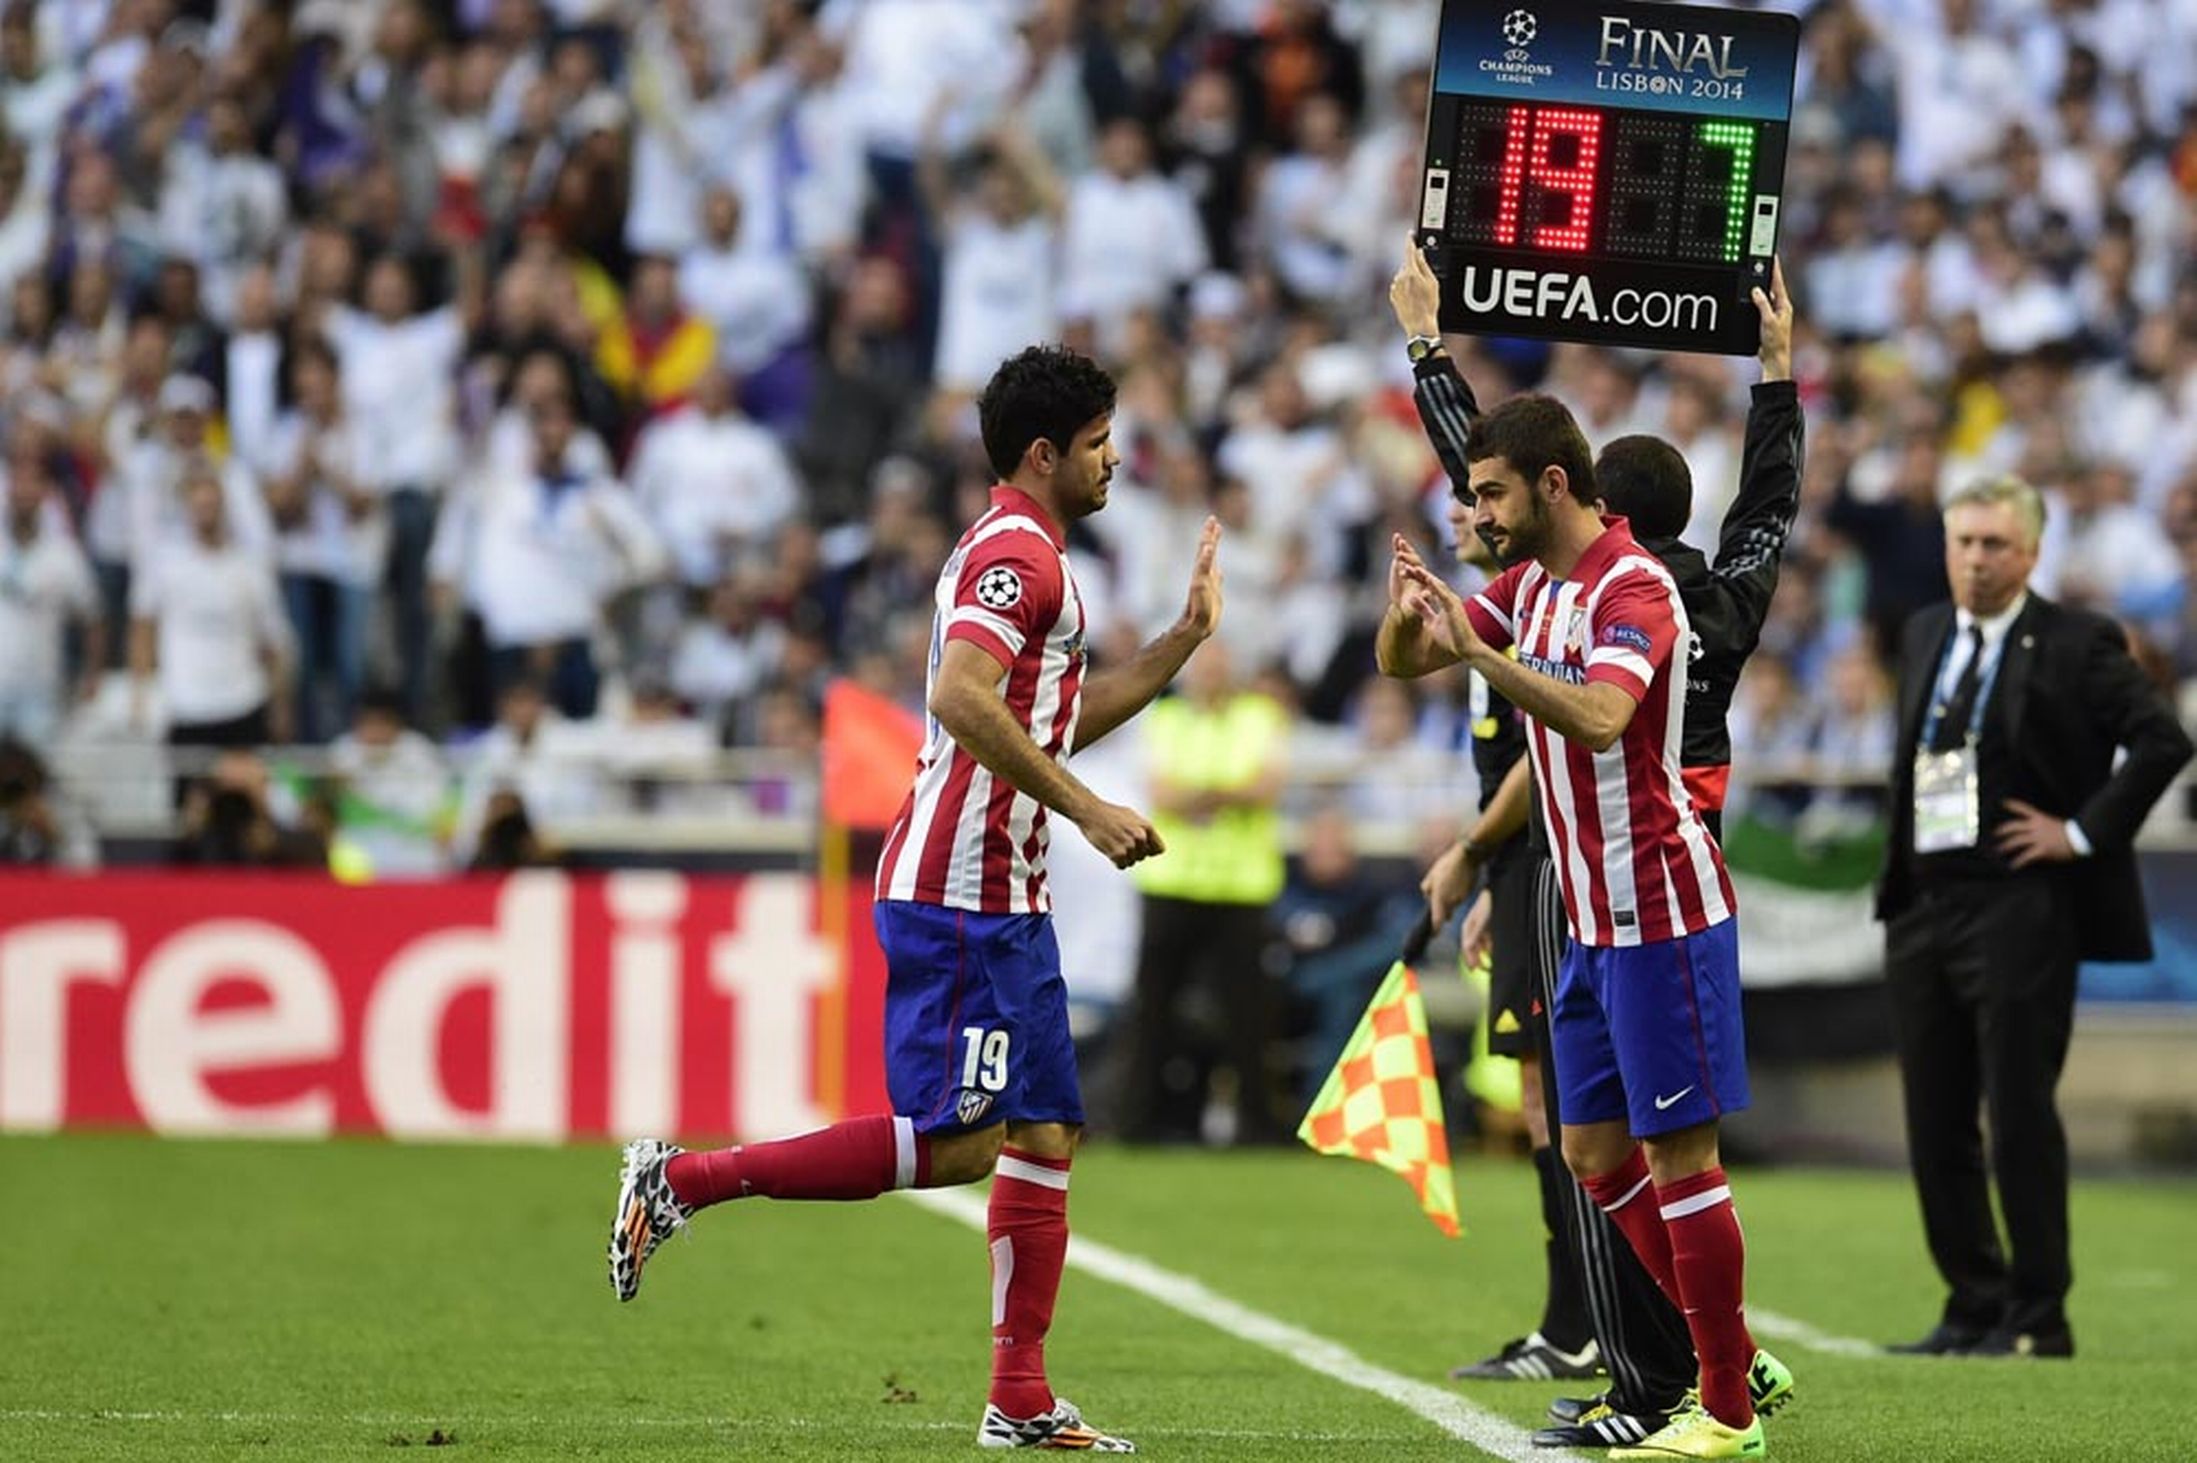 140524_ESP_Real_Madrid_v_Atletico_Madrid_4_1_Diego_Costa_substituted_Adrian_Lopez_V2